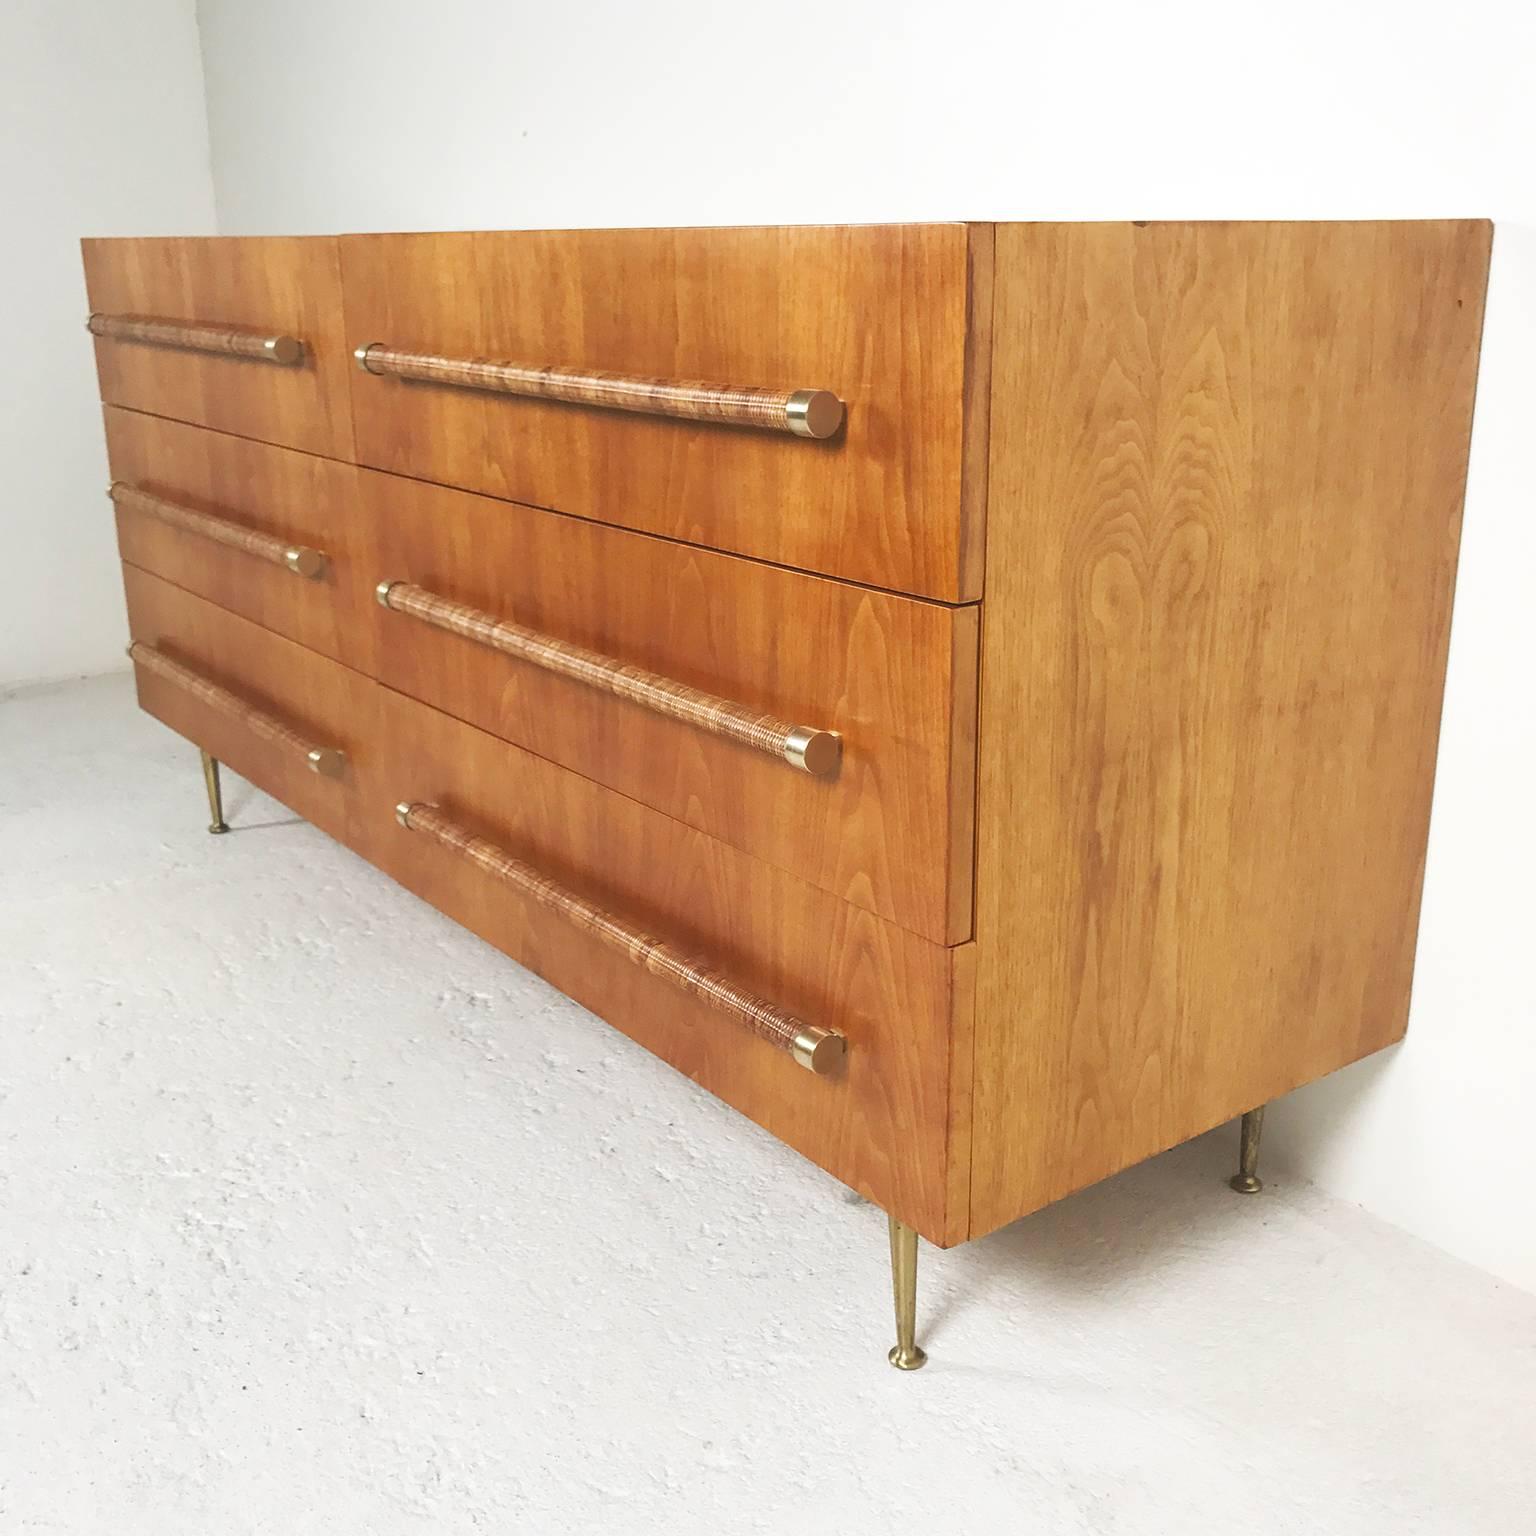 A splendid chest of drawers in walnut by the British designer T.H. Robsjohn-Gibbings for the U.S. manufacturer Widdicomb with six drawers. The handles are in rattan-wrapped and the legs in golden brass. Note: Two spare handles are available.